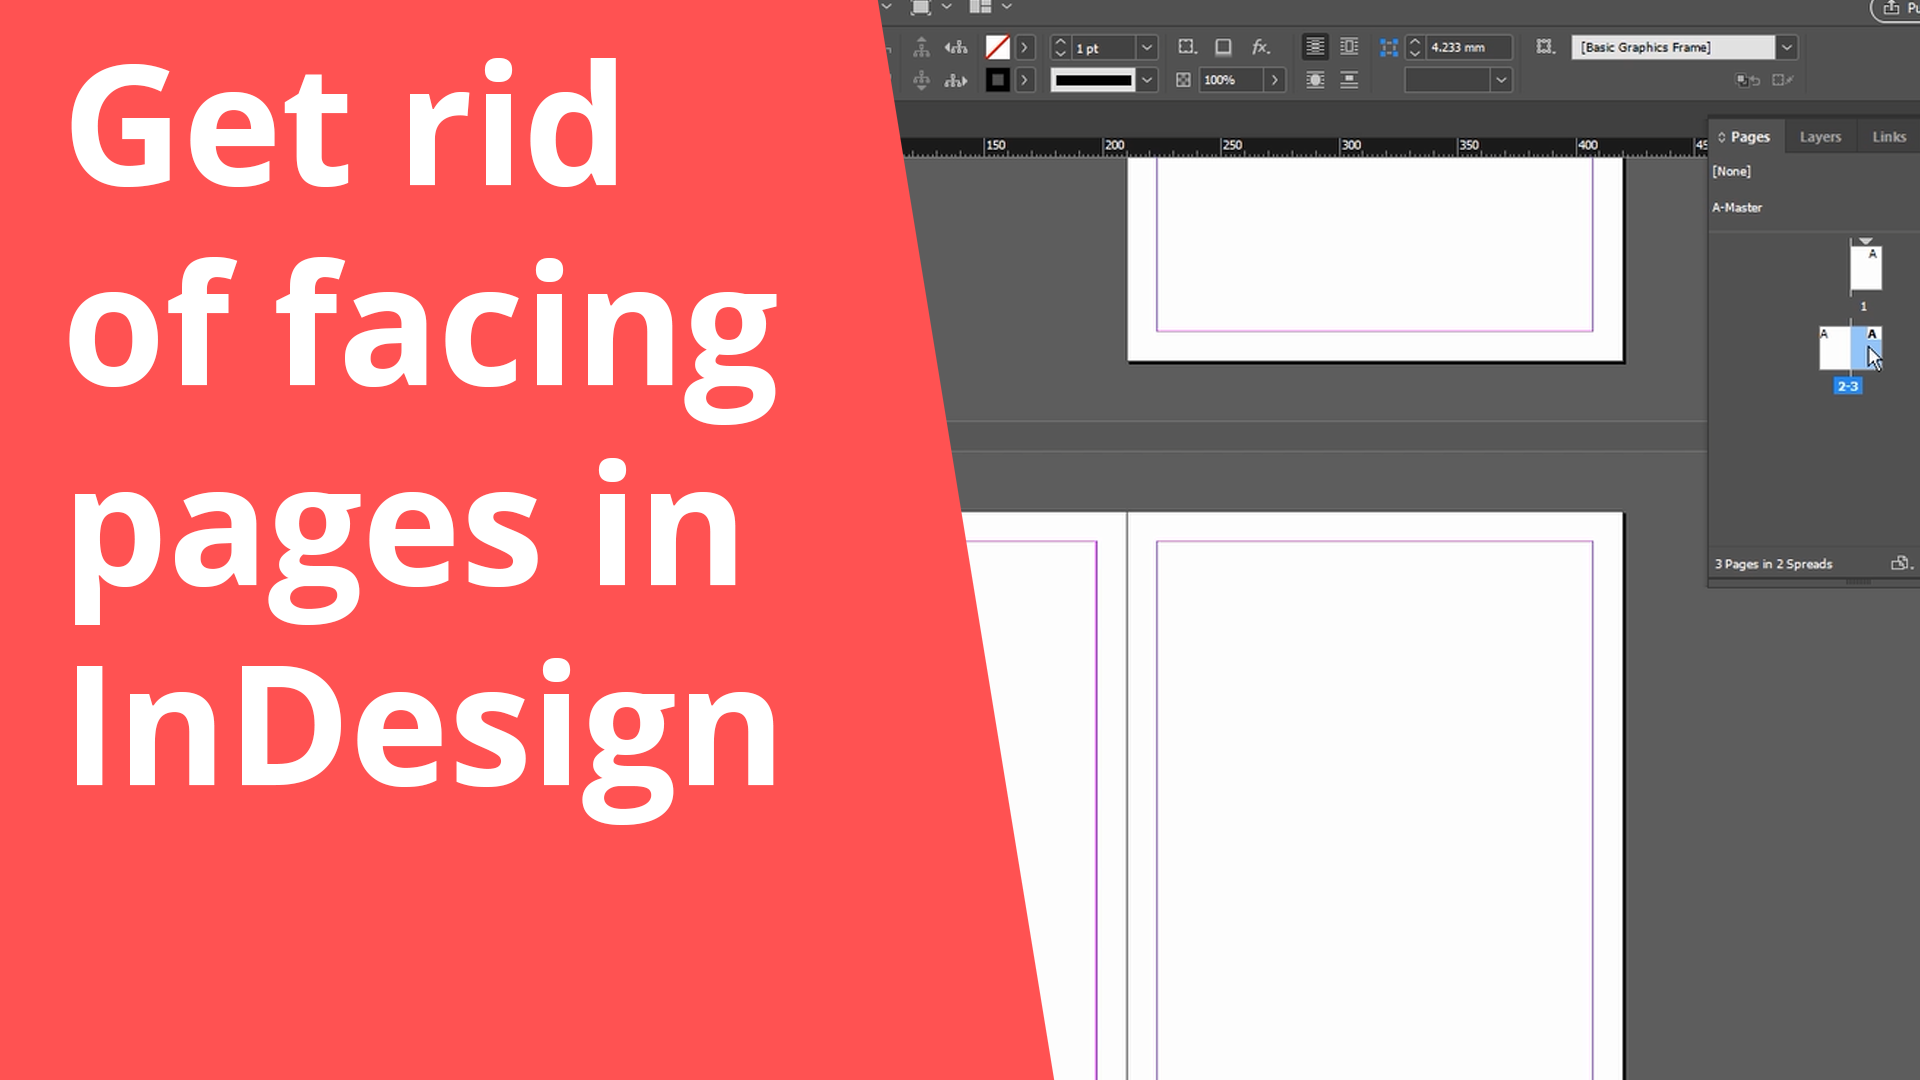 Get rid of facing pages in InDesign